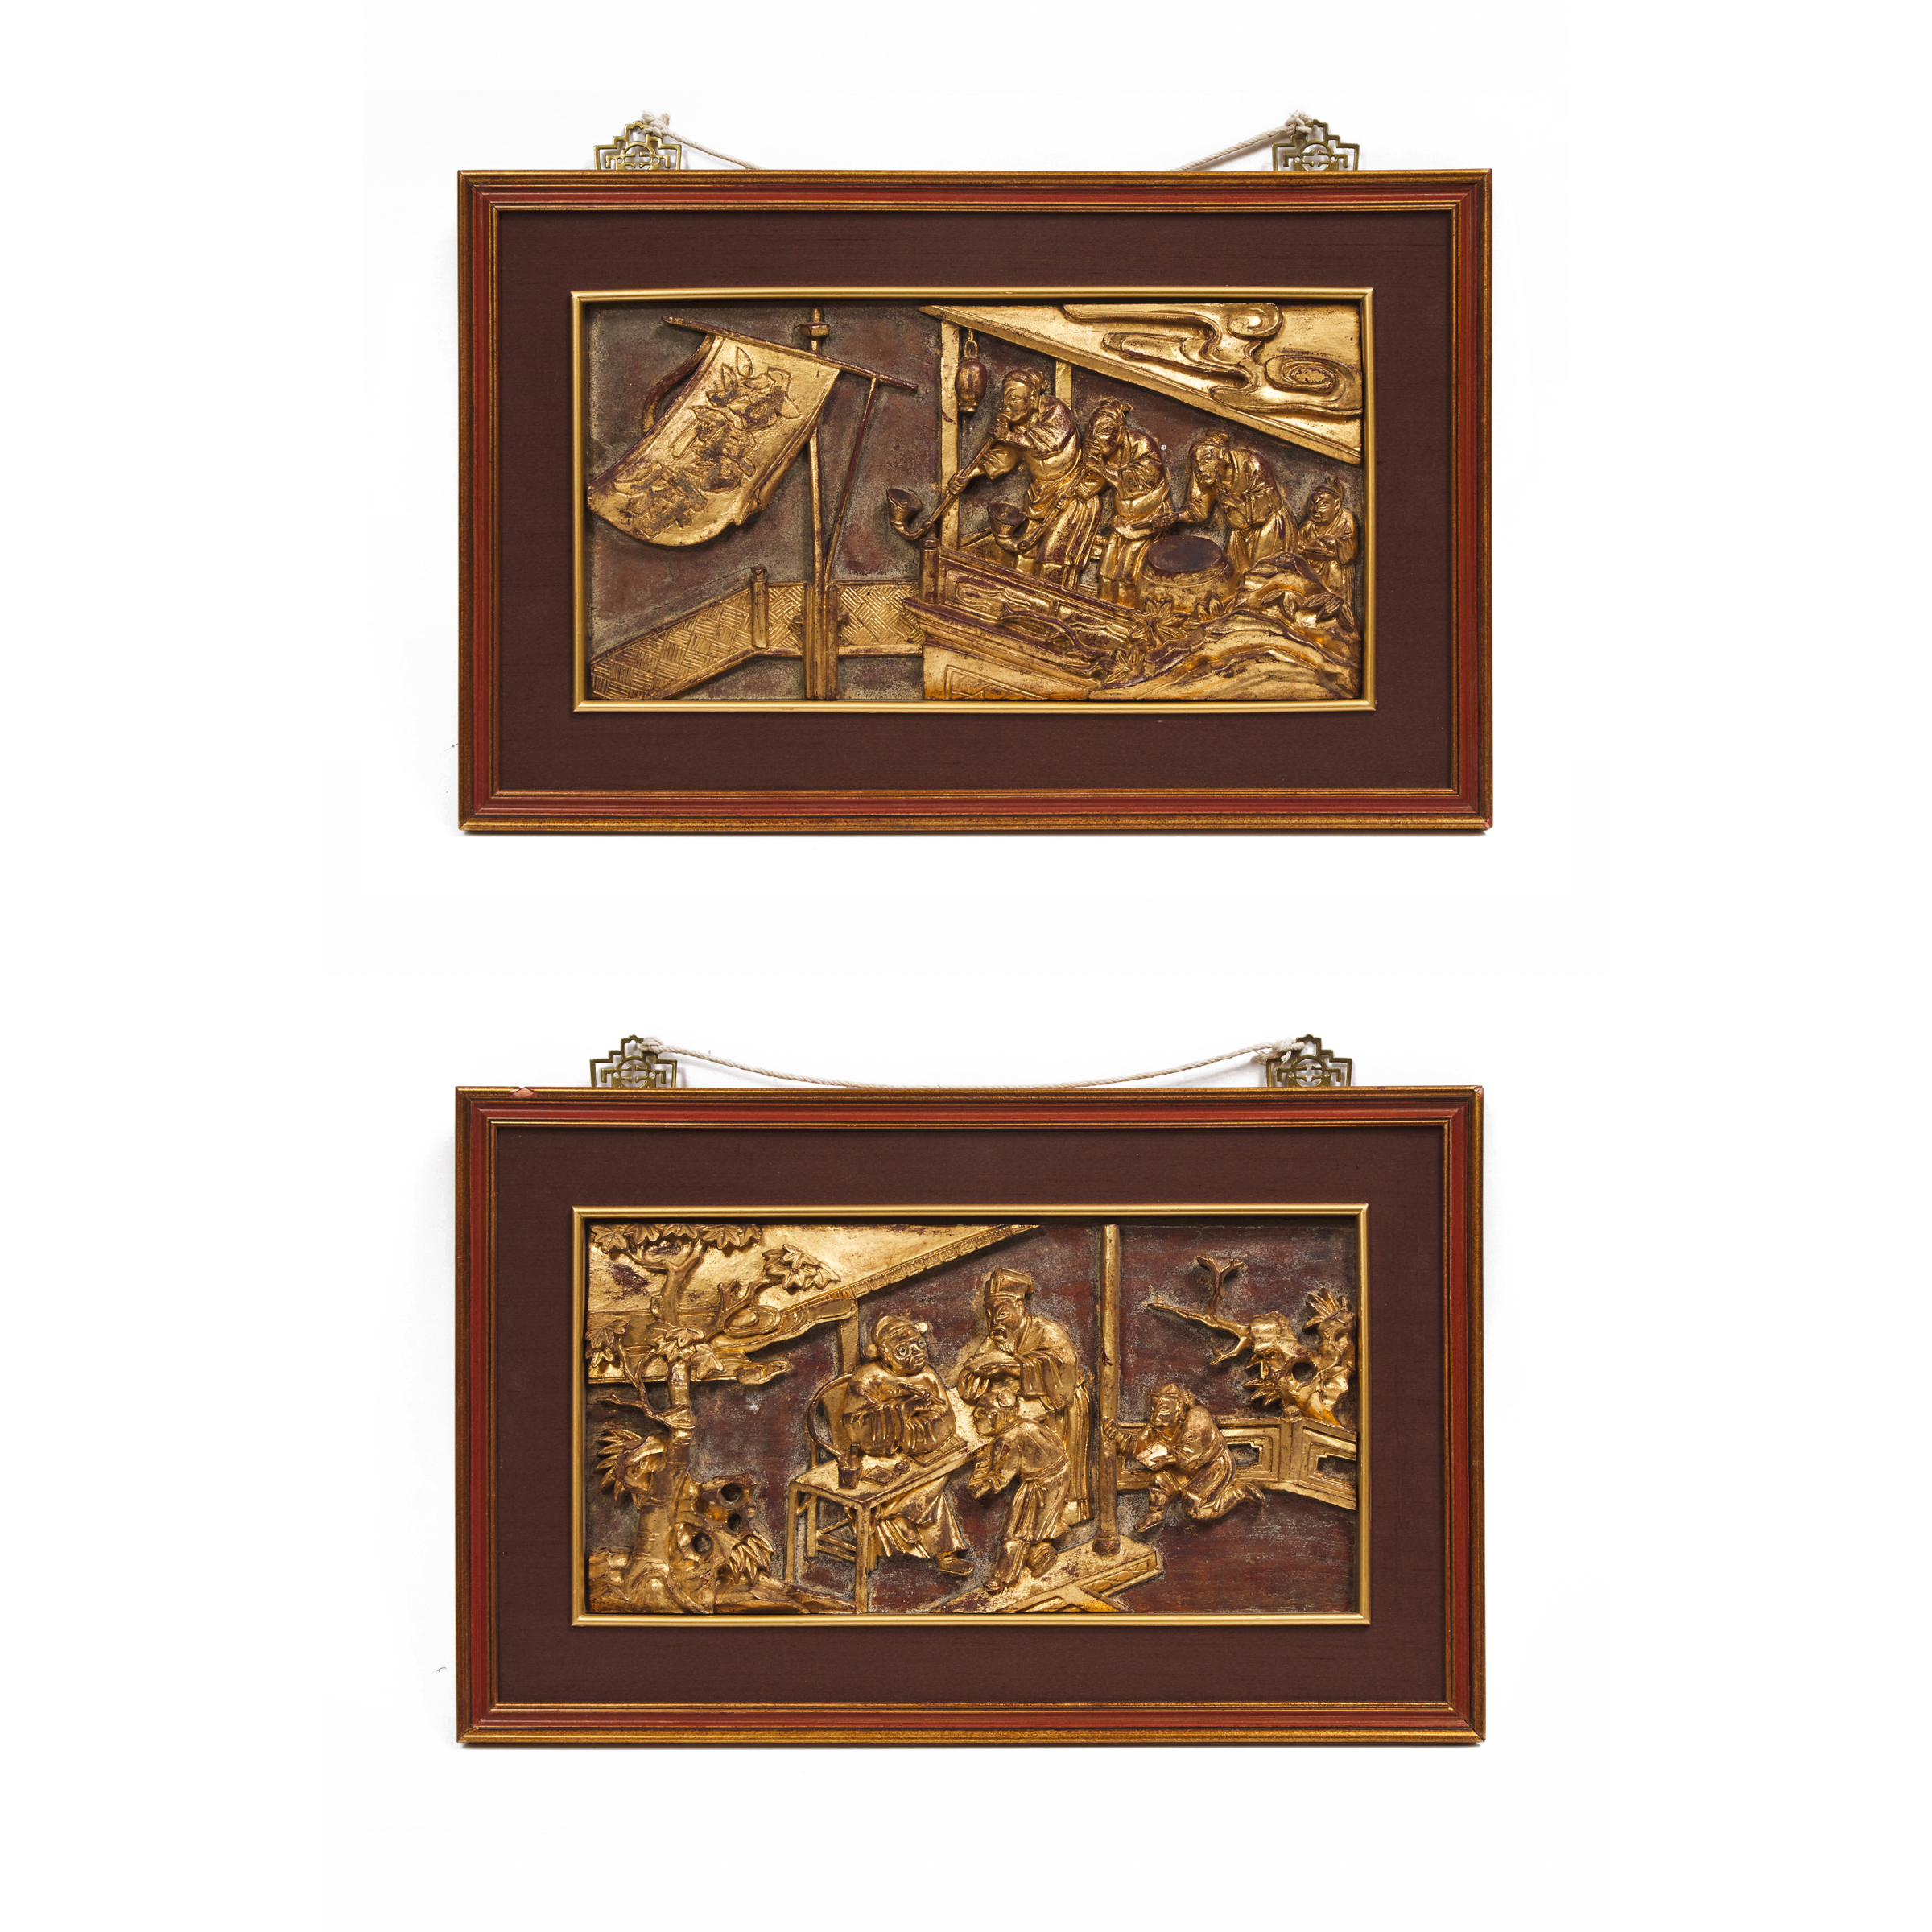 A Pair of Framed Gilt Wood Temple Carvings, 19th Century